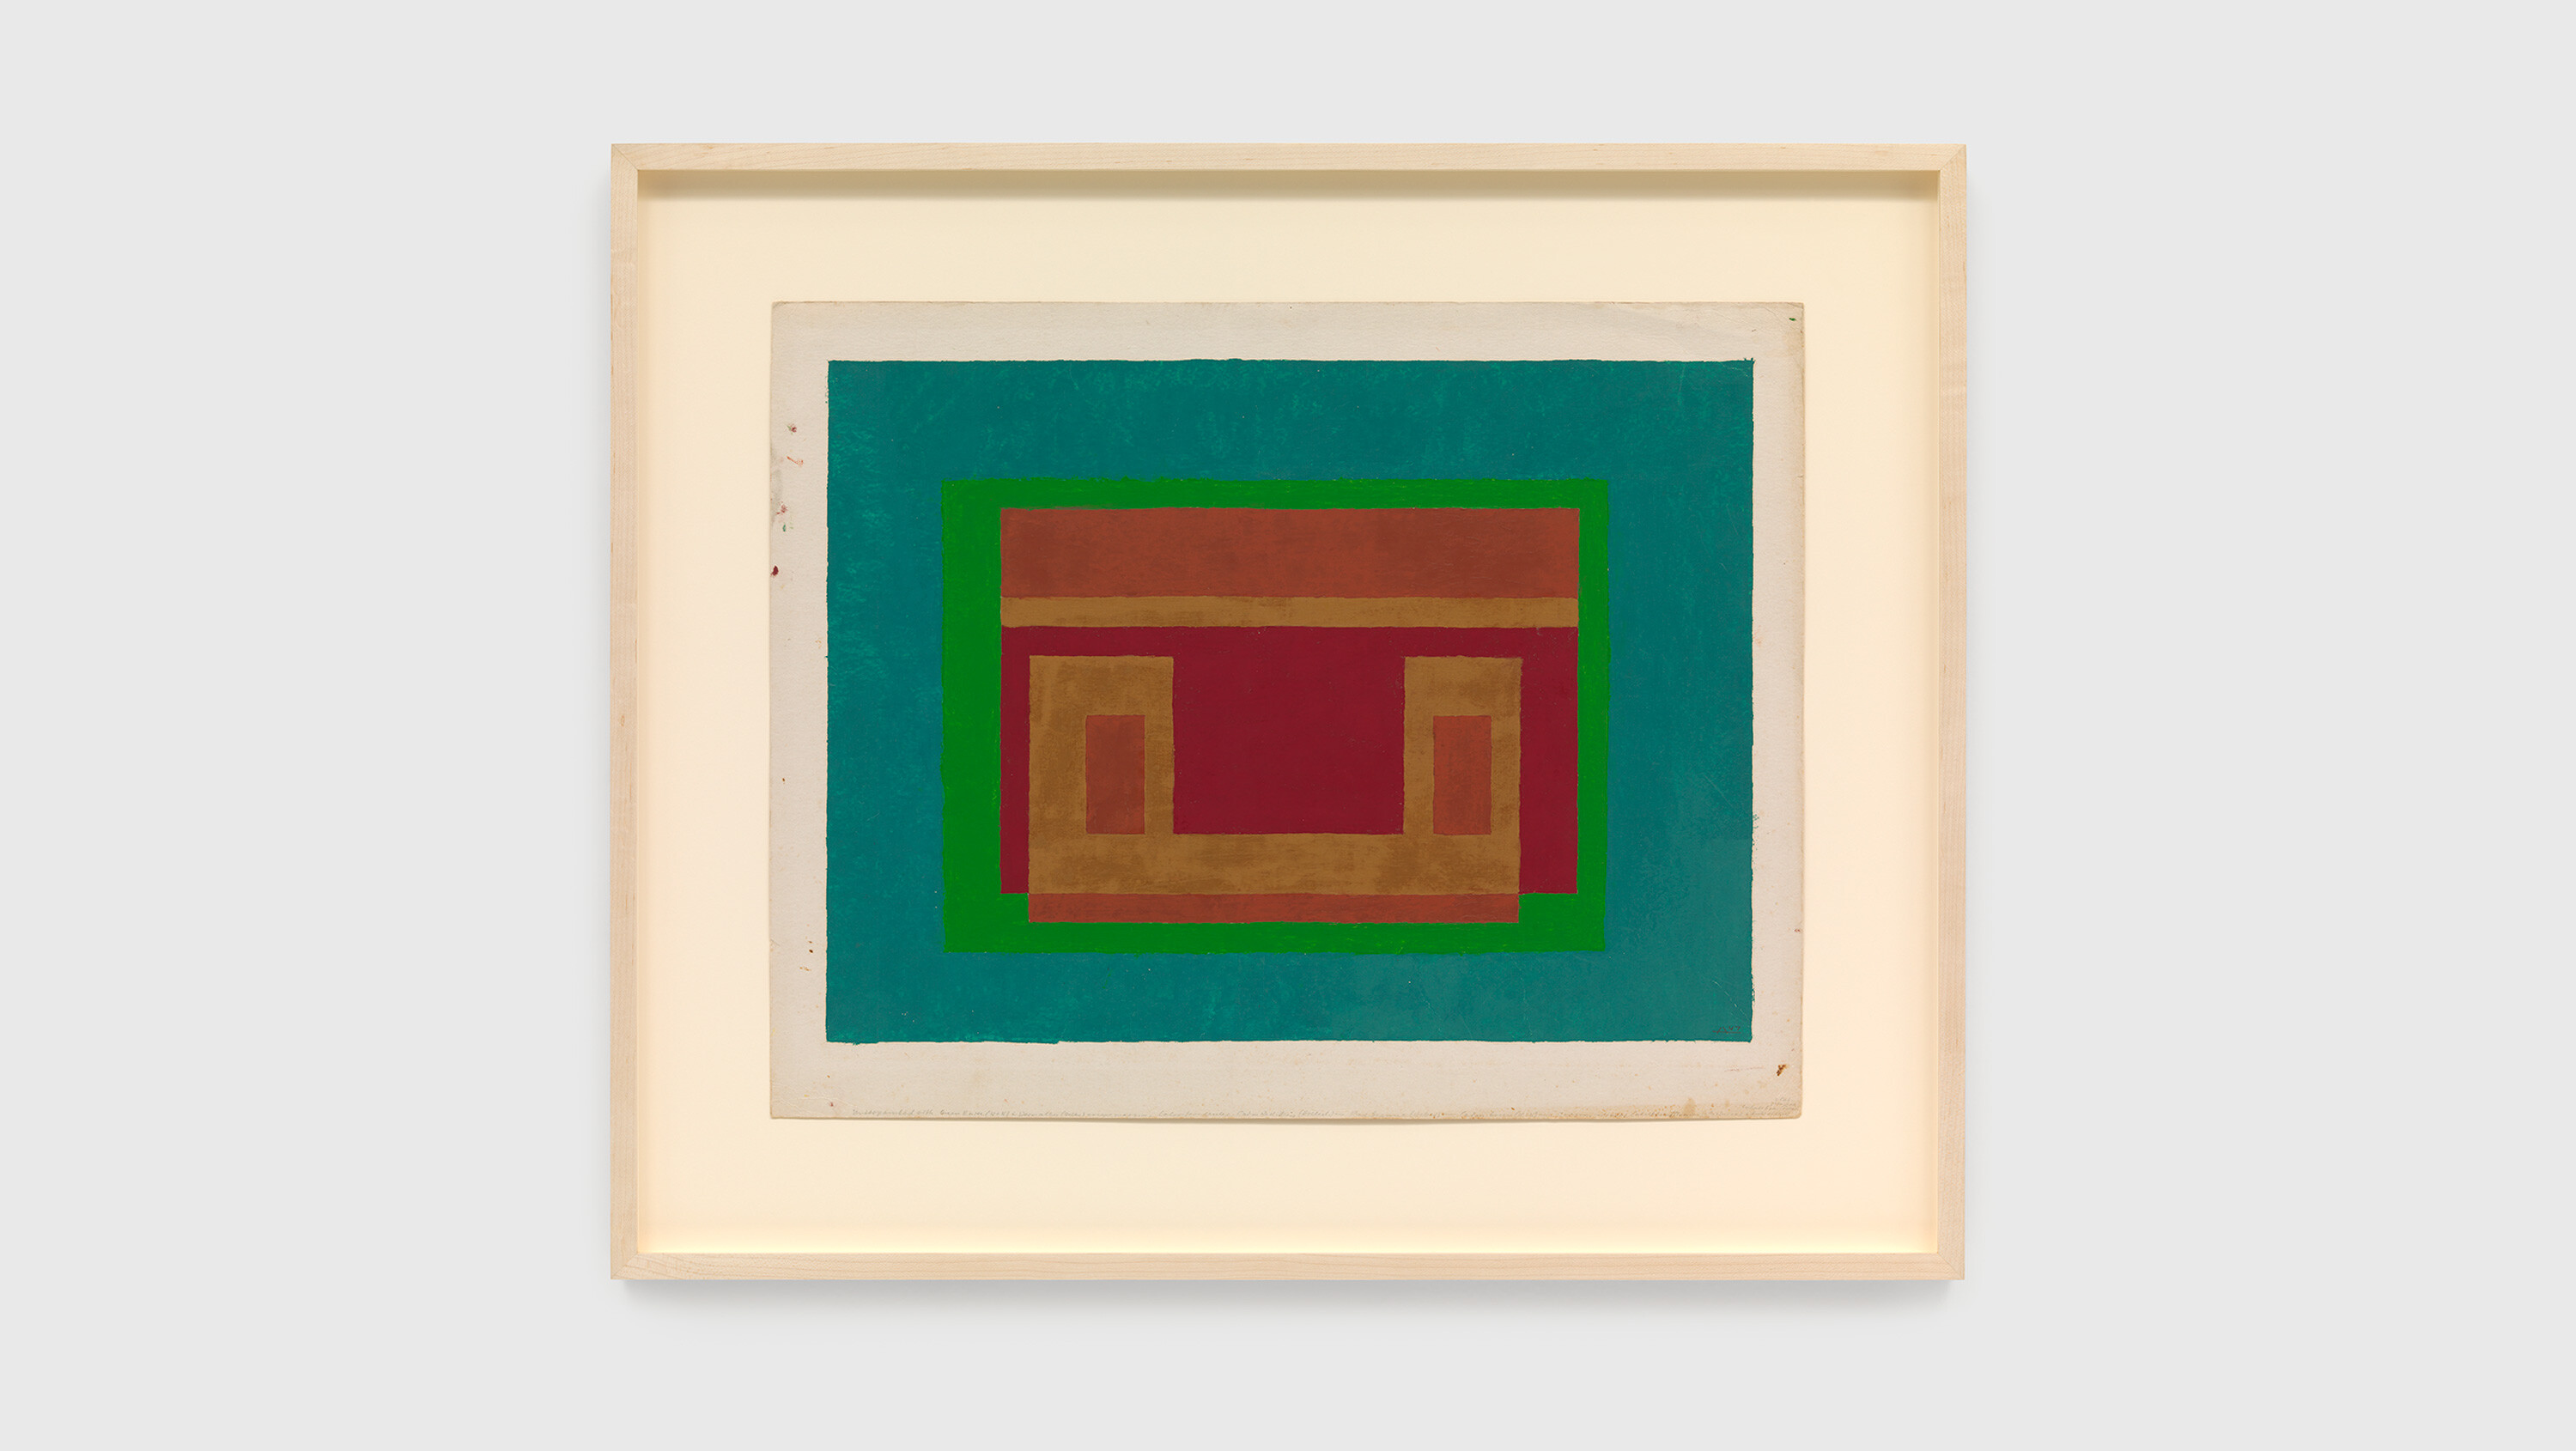 A drawing by Josef Albers, titled Variant/Adobe, dated 1947.